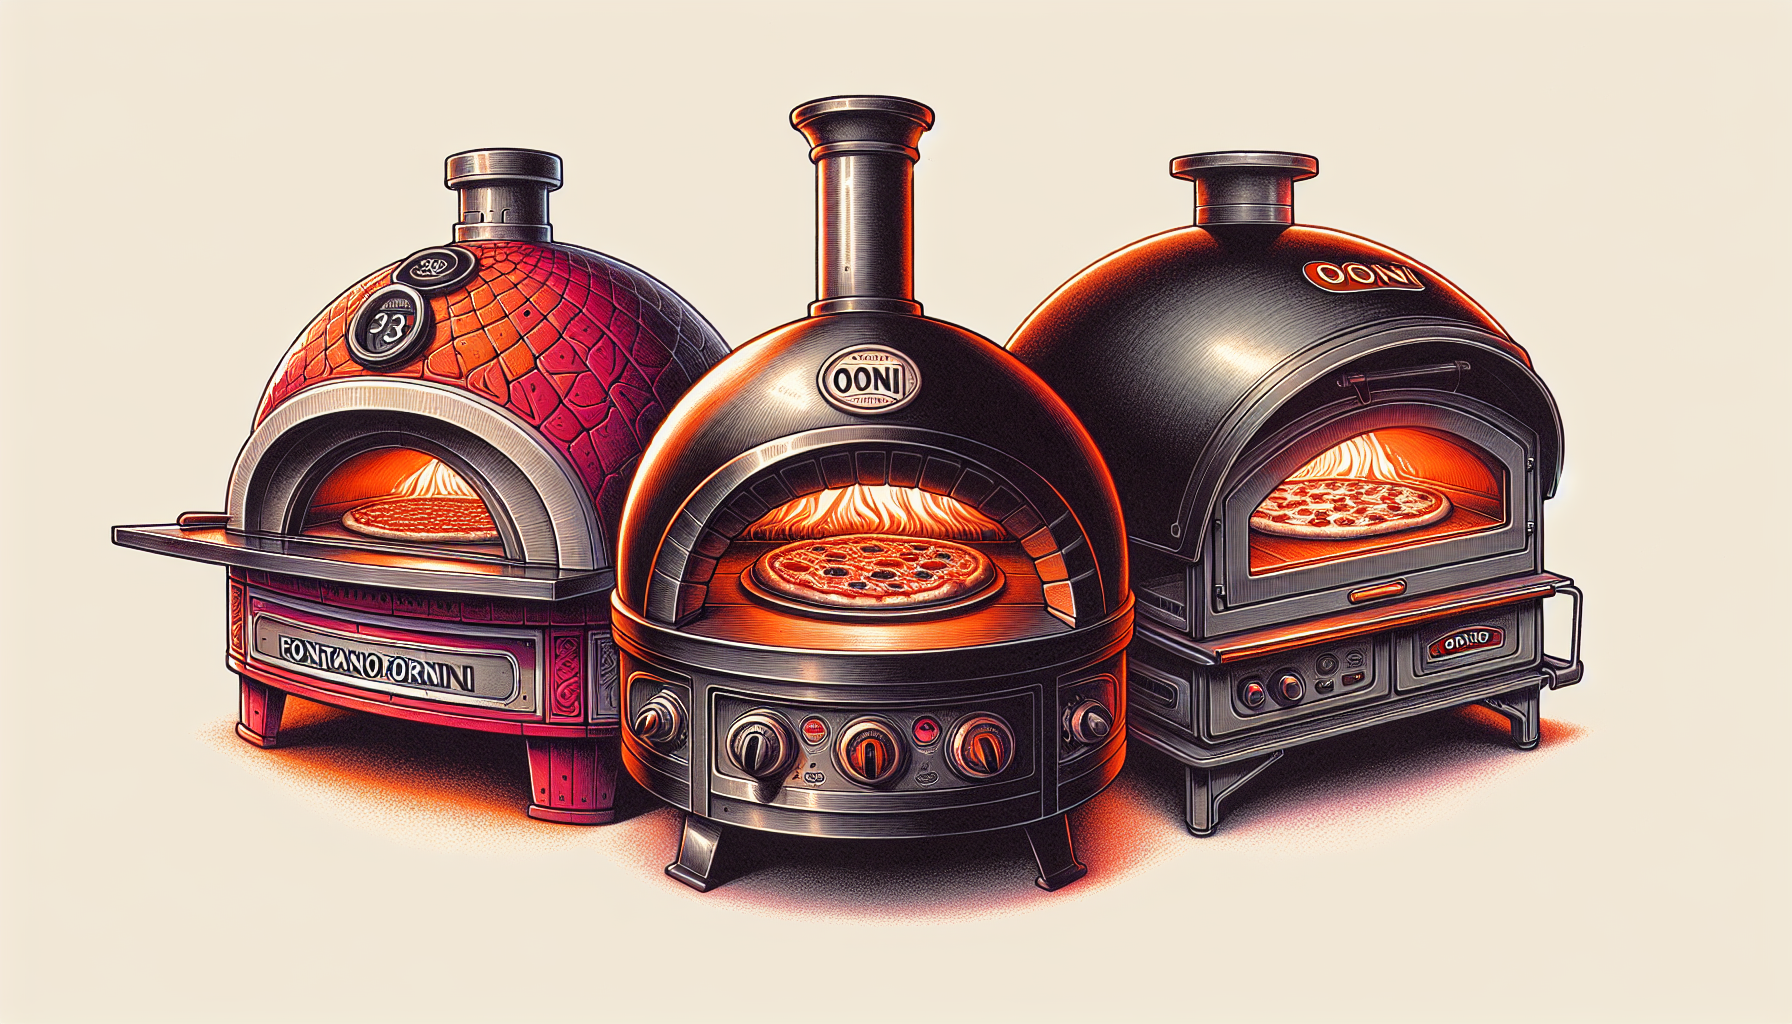 Illustration of top wood fired pizza oven brands